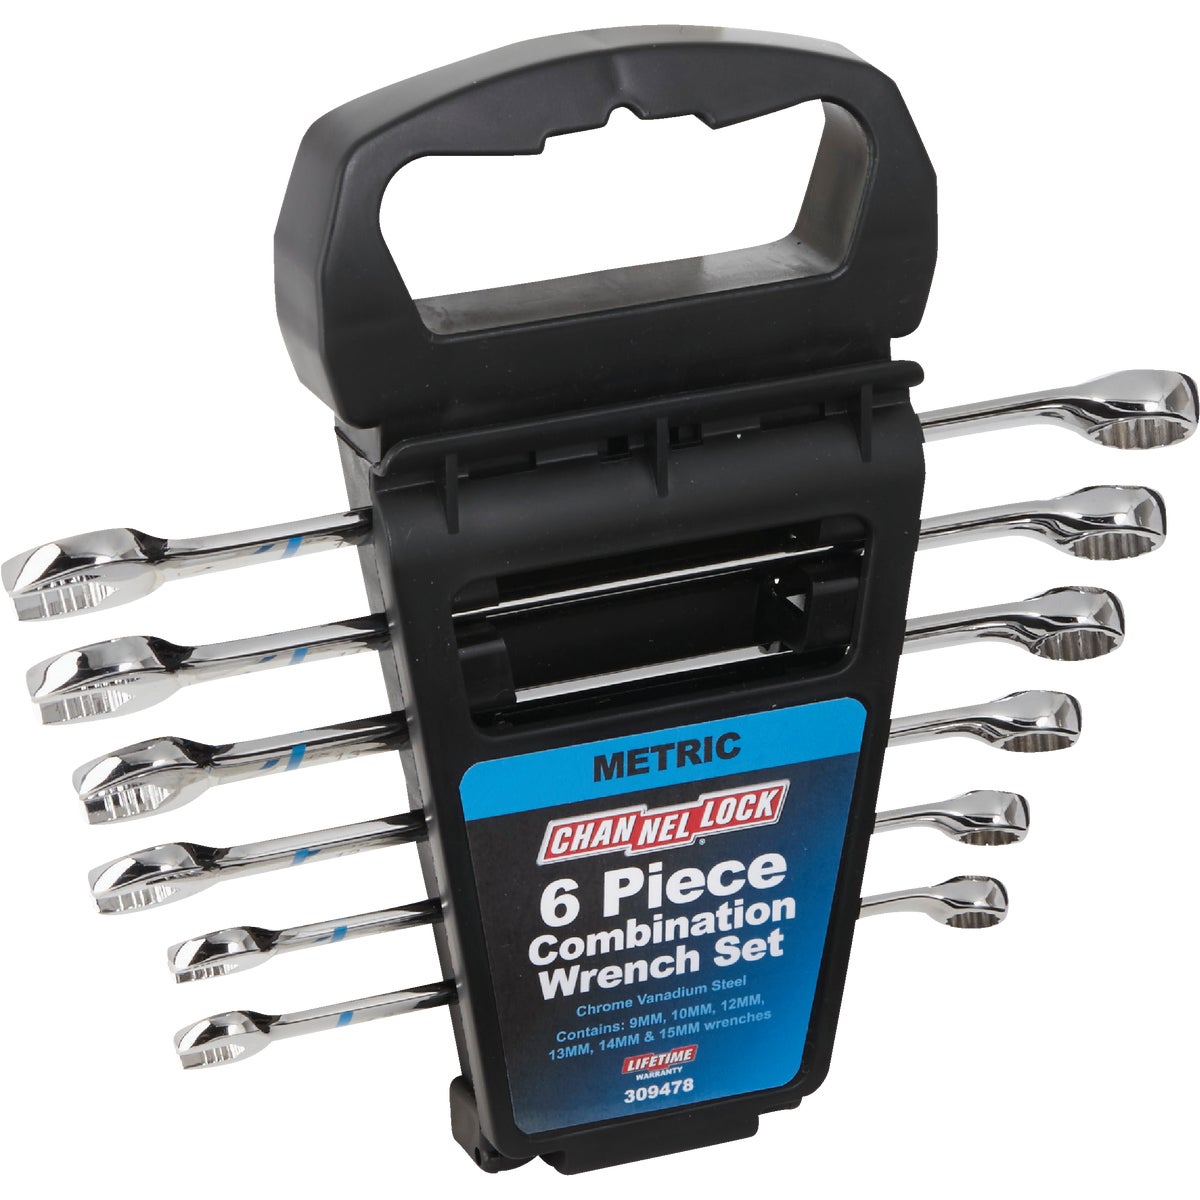 Channellock Metric 12-Point Combination Wrench Set (6-Piece)